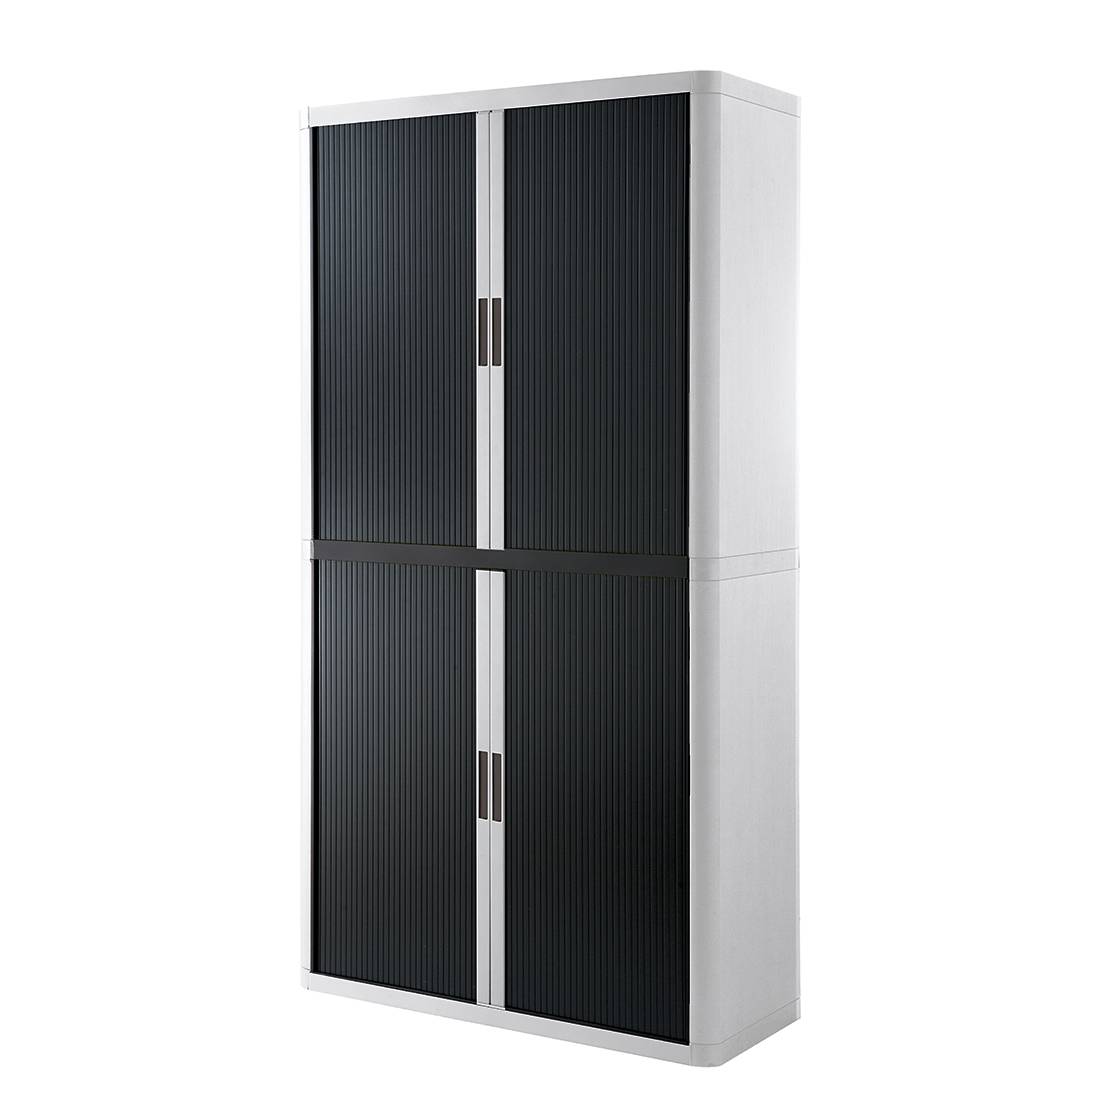 Image of Armoire à dossiers easyOffice 000000001000071303